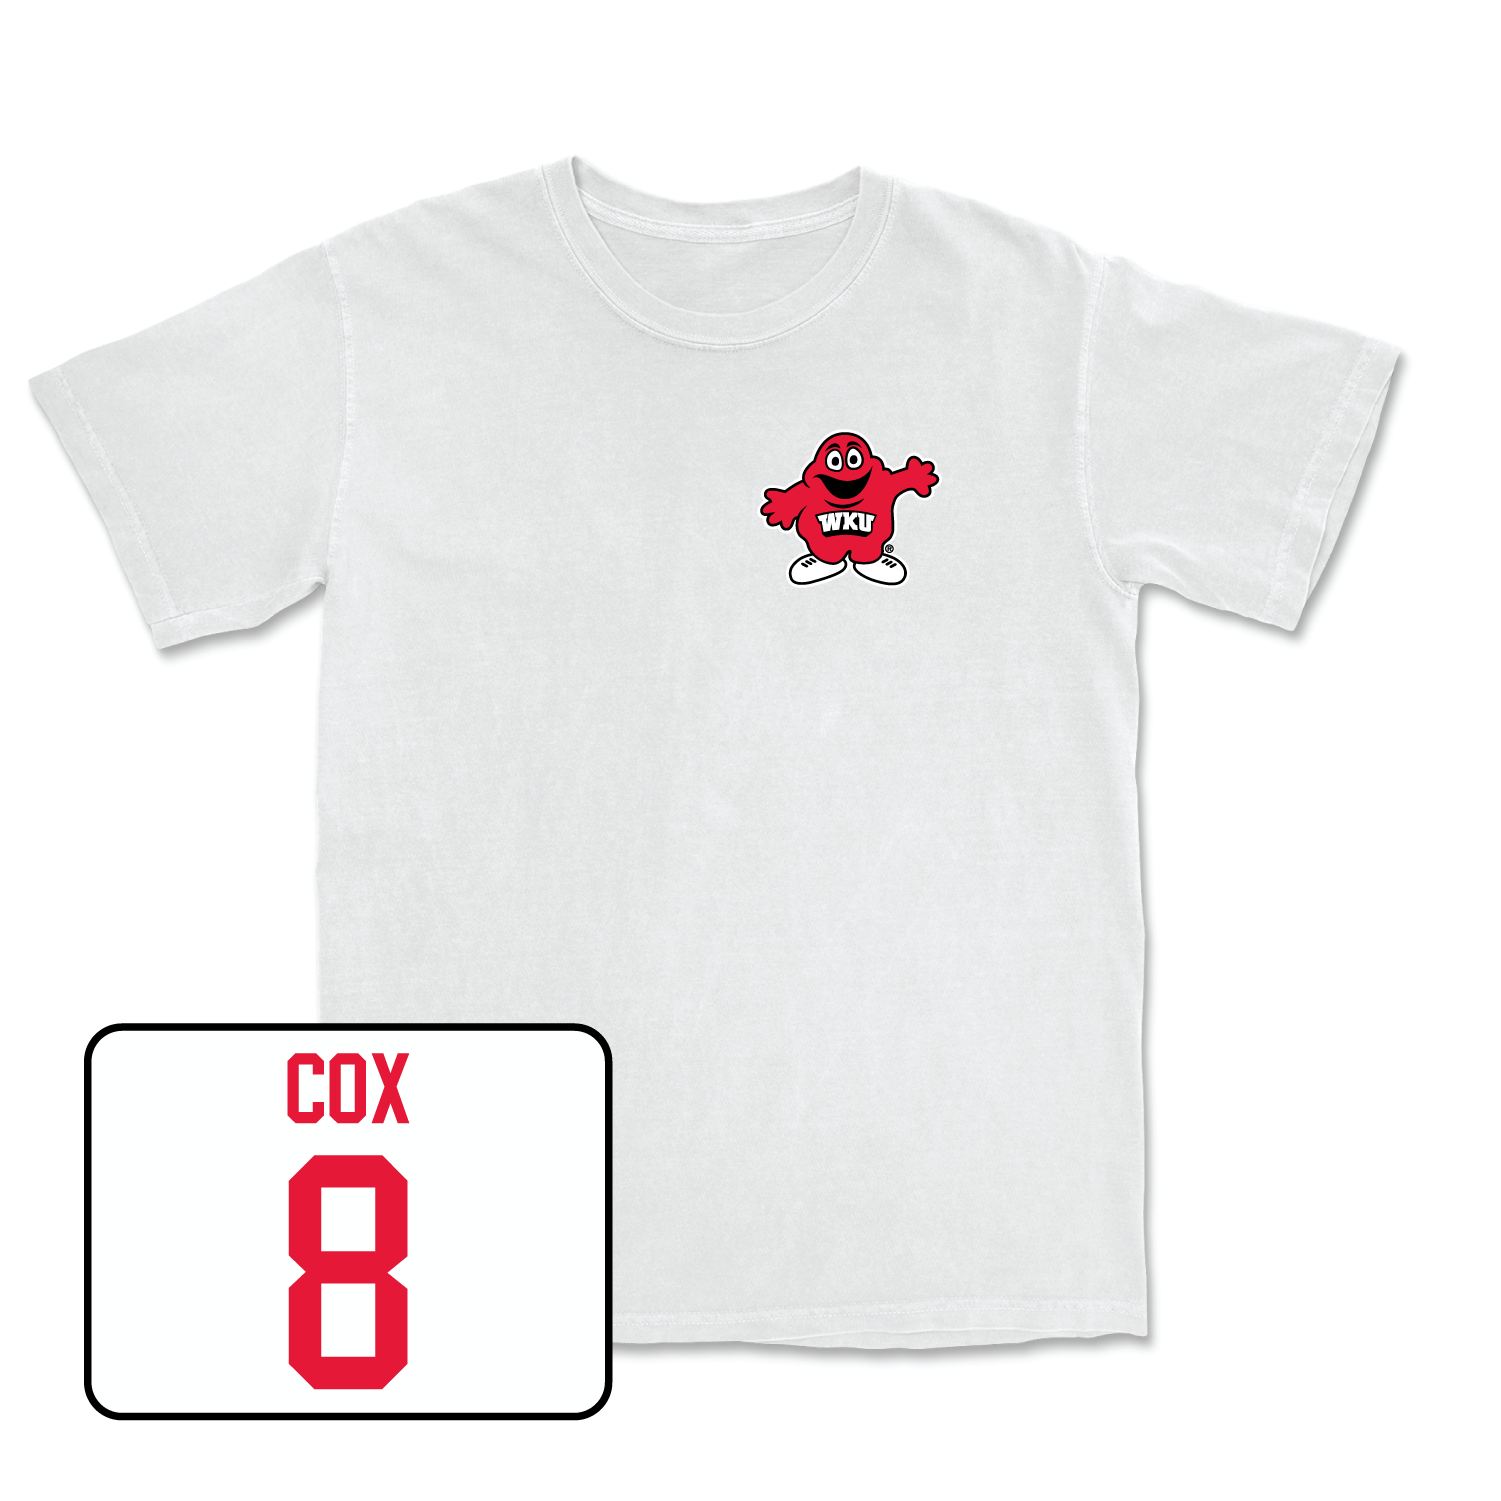 White Women's Volleyball Big Red Comfort Colors Tee X-Large / Kaylee Cox | #8